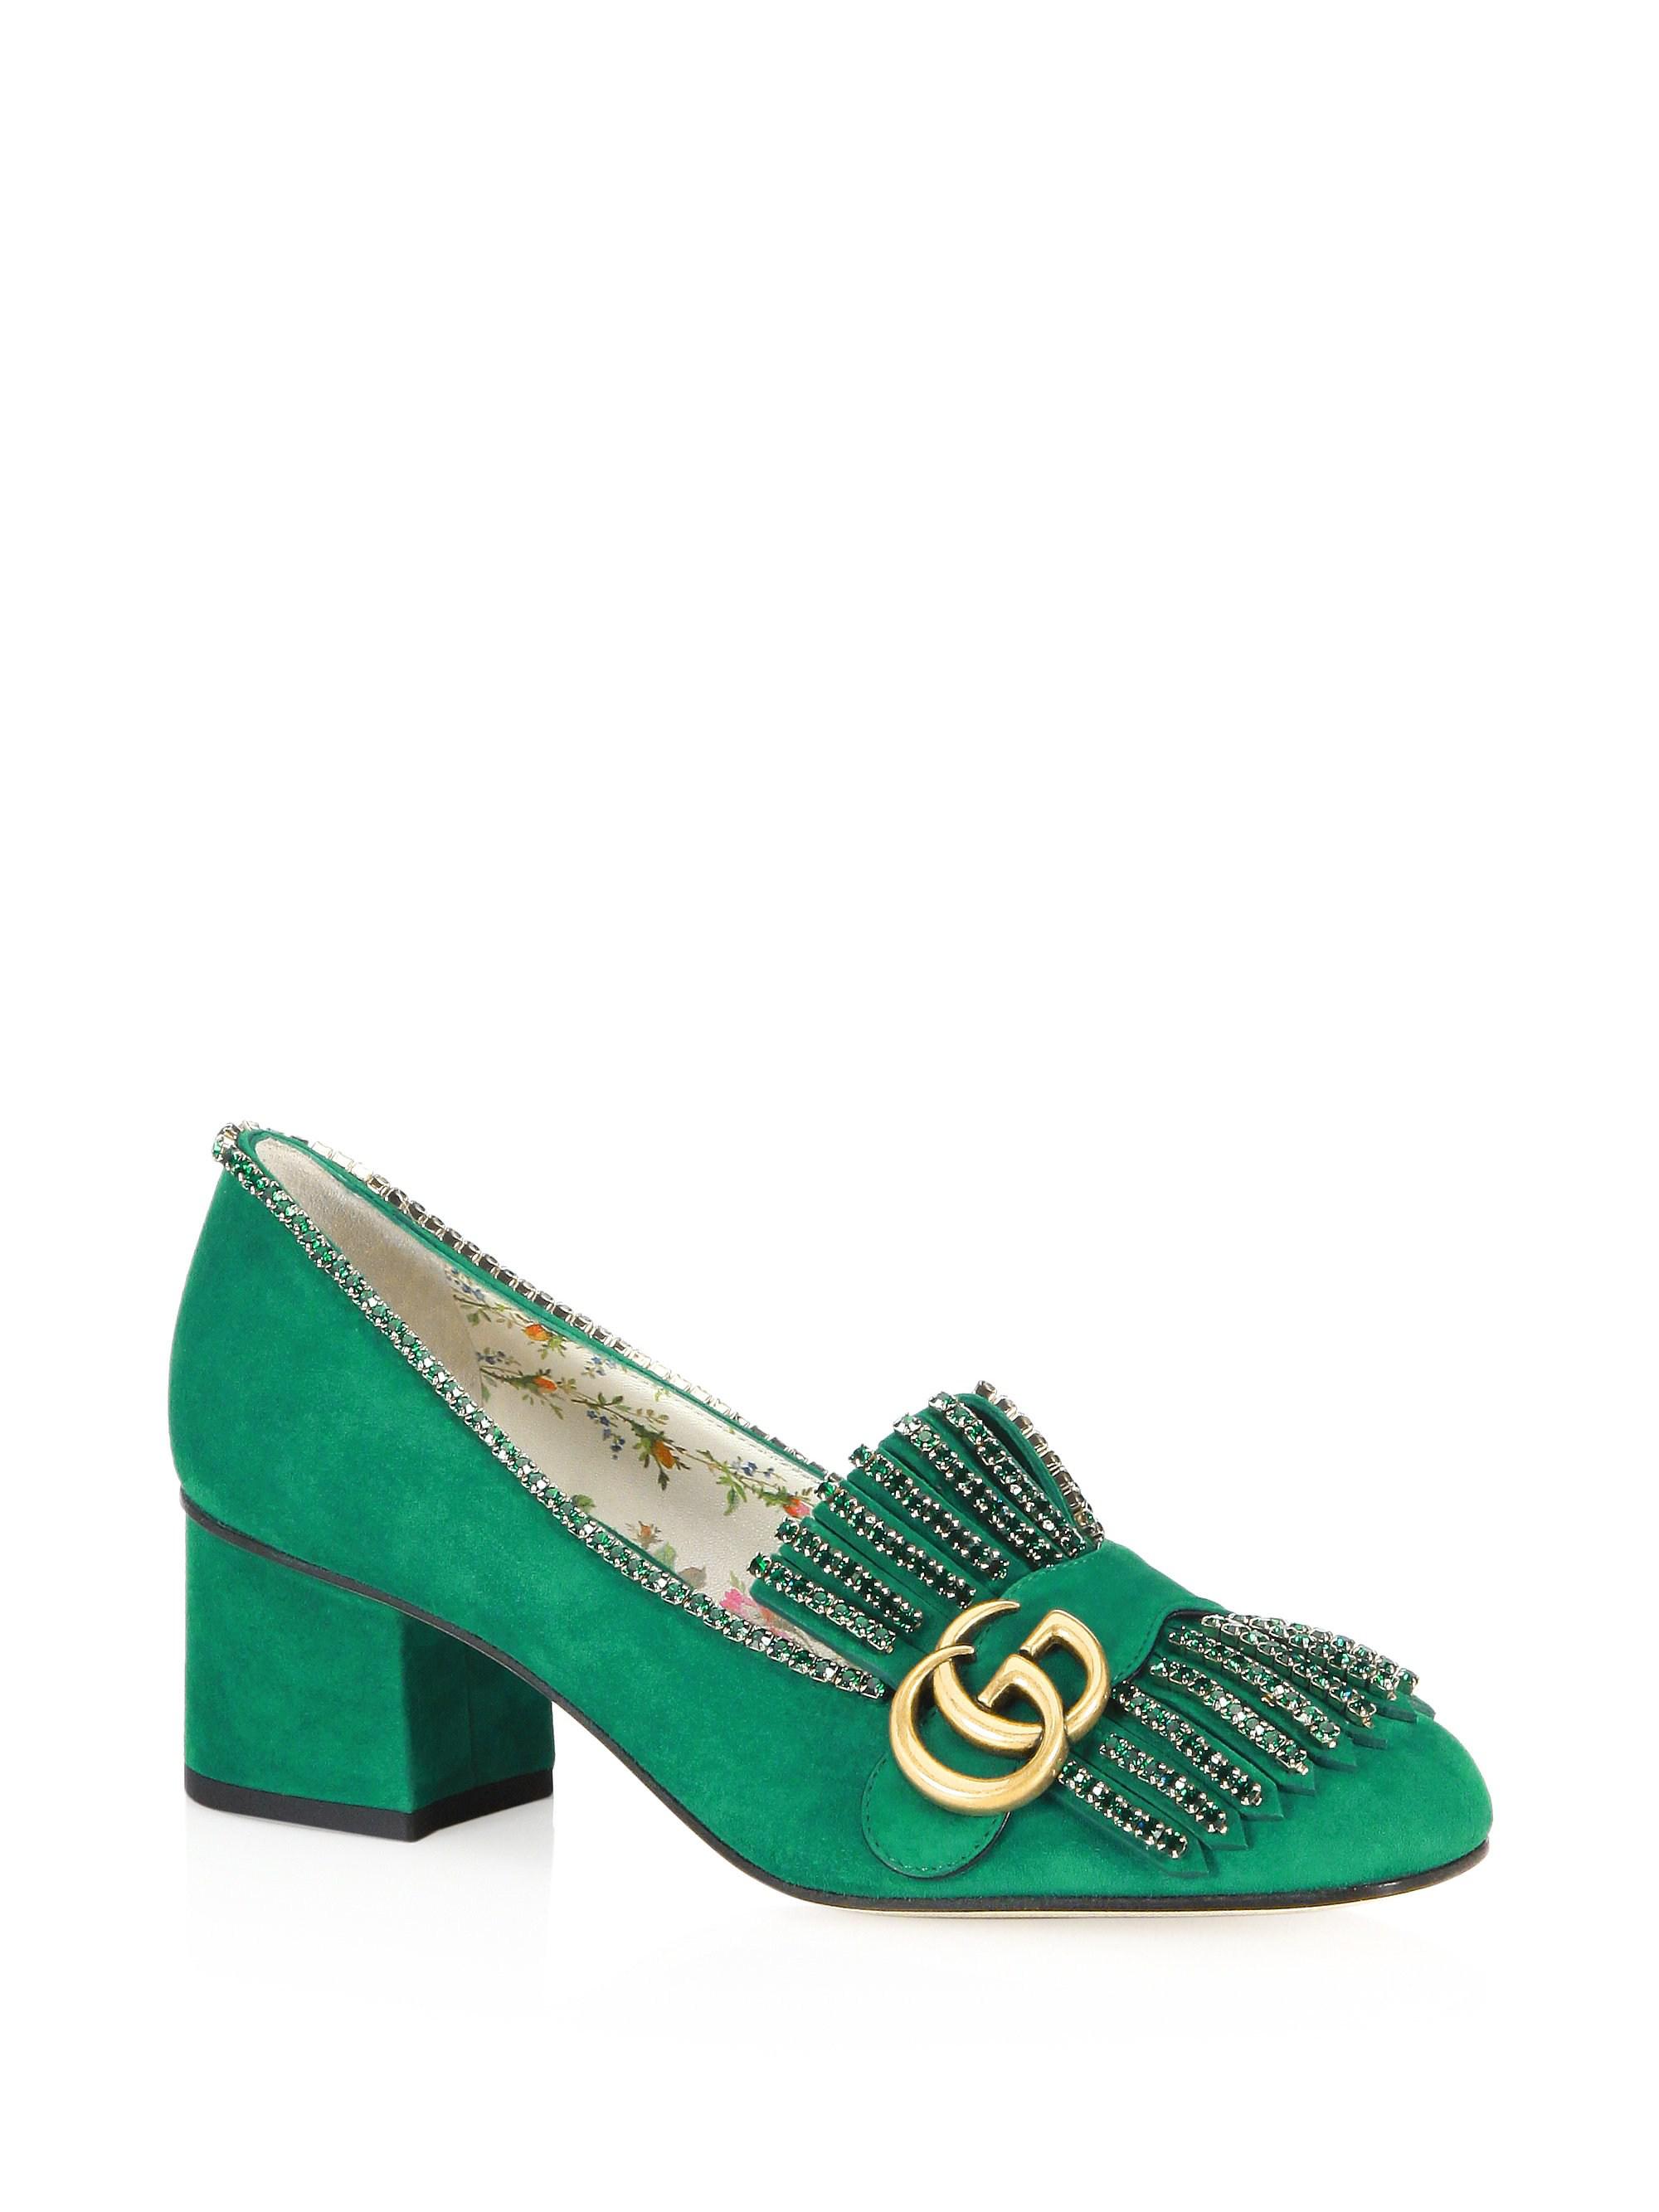 Gucci Marmont Suede Mid-heel Pumps With Crystals in Green | Lyst